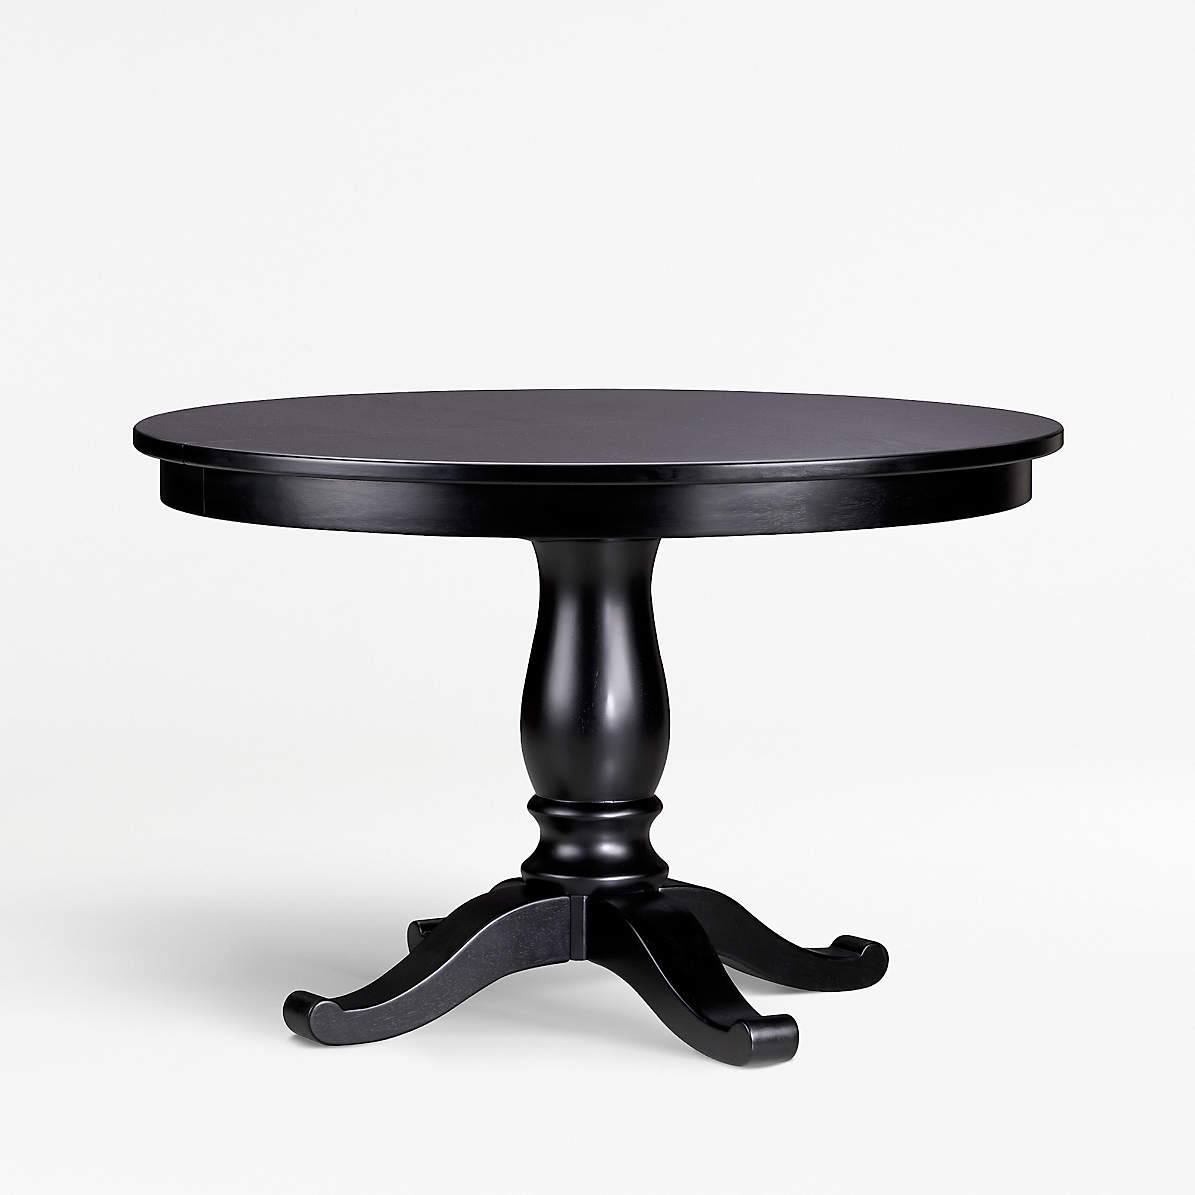 Avalon 45 Black Round Extension Dining Table Reviews Crate And Barrel